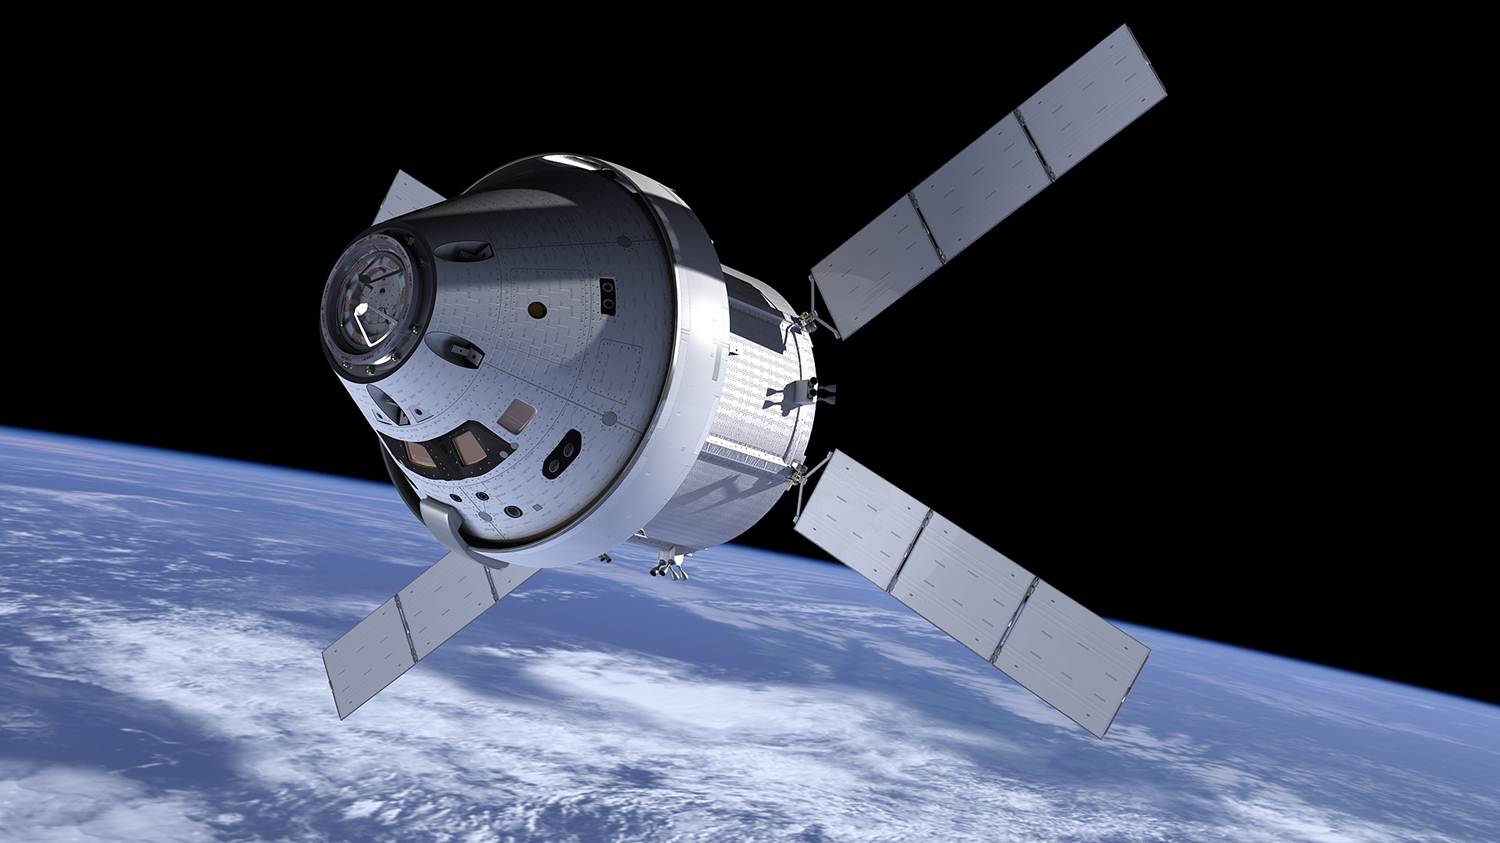 The Orion spacecraft